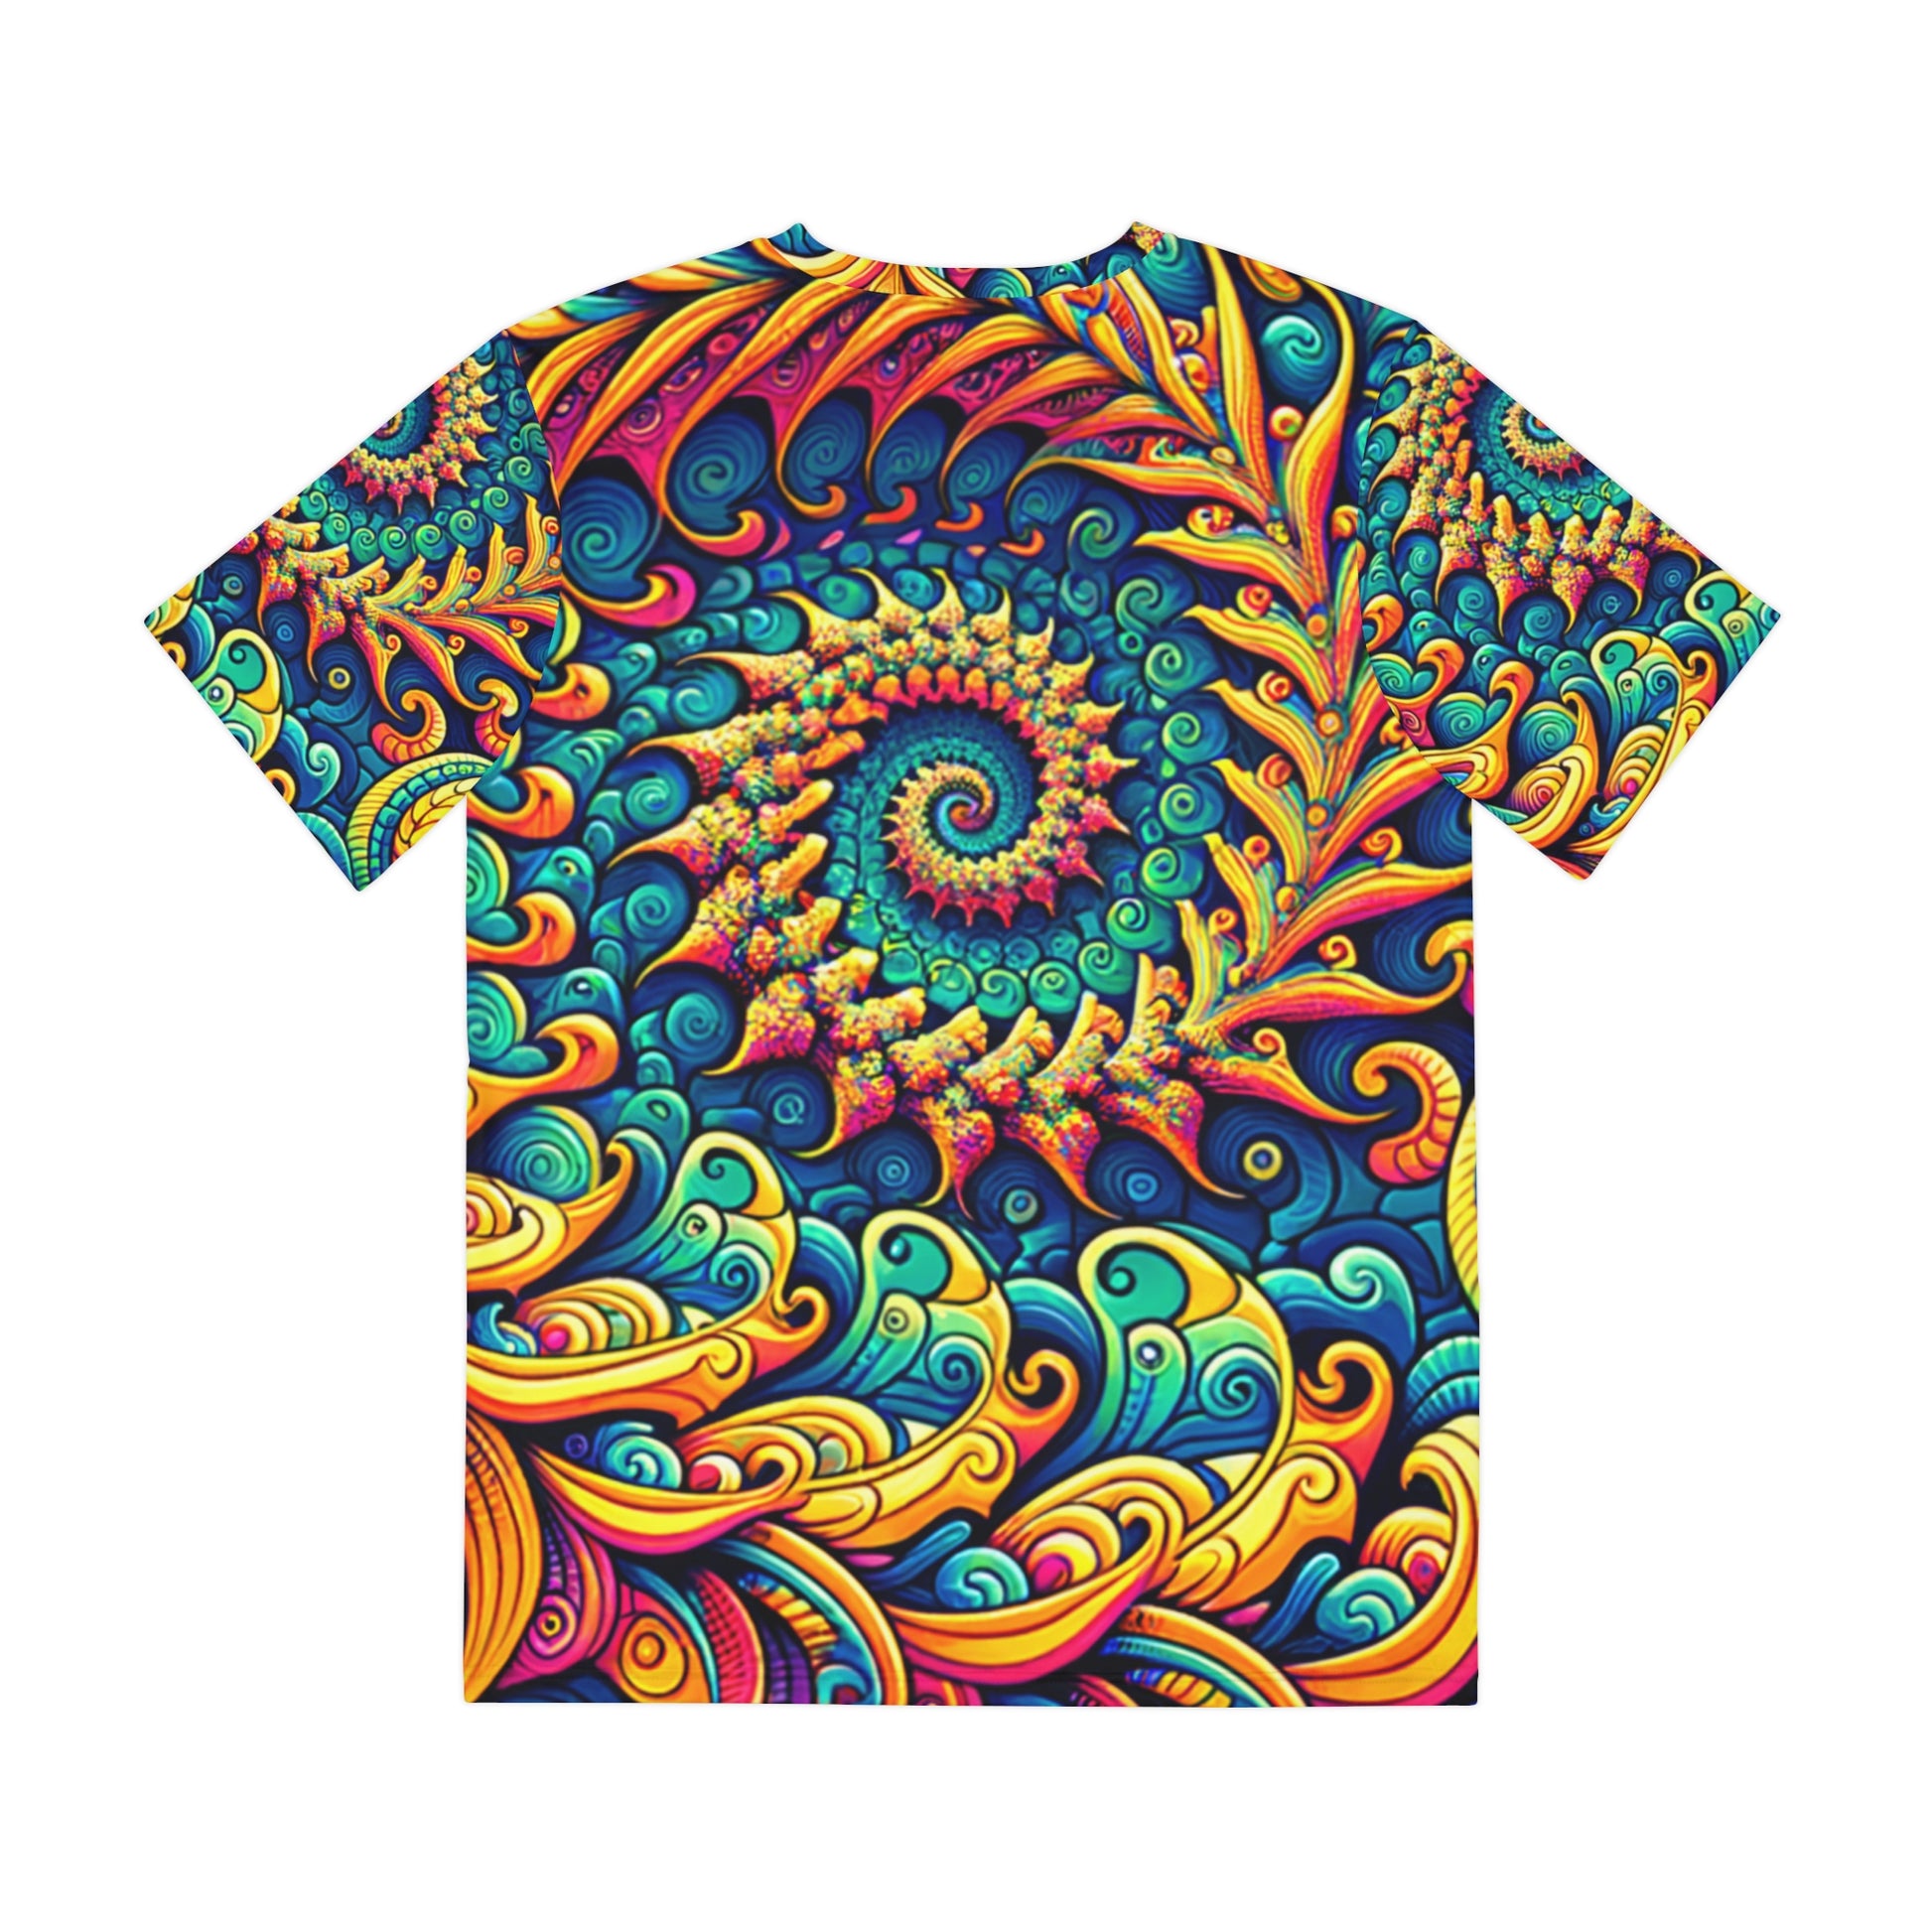 Back view of the Psychedelic Peacock Swirls Crewneck Pullover All-Over Print Short-Sleeved Shirt yellow blue green red peacock swirl pattern